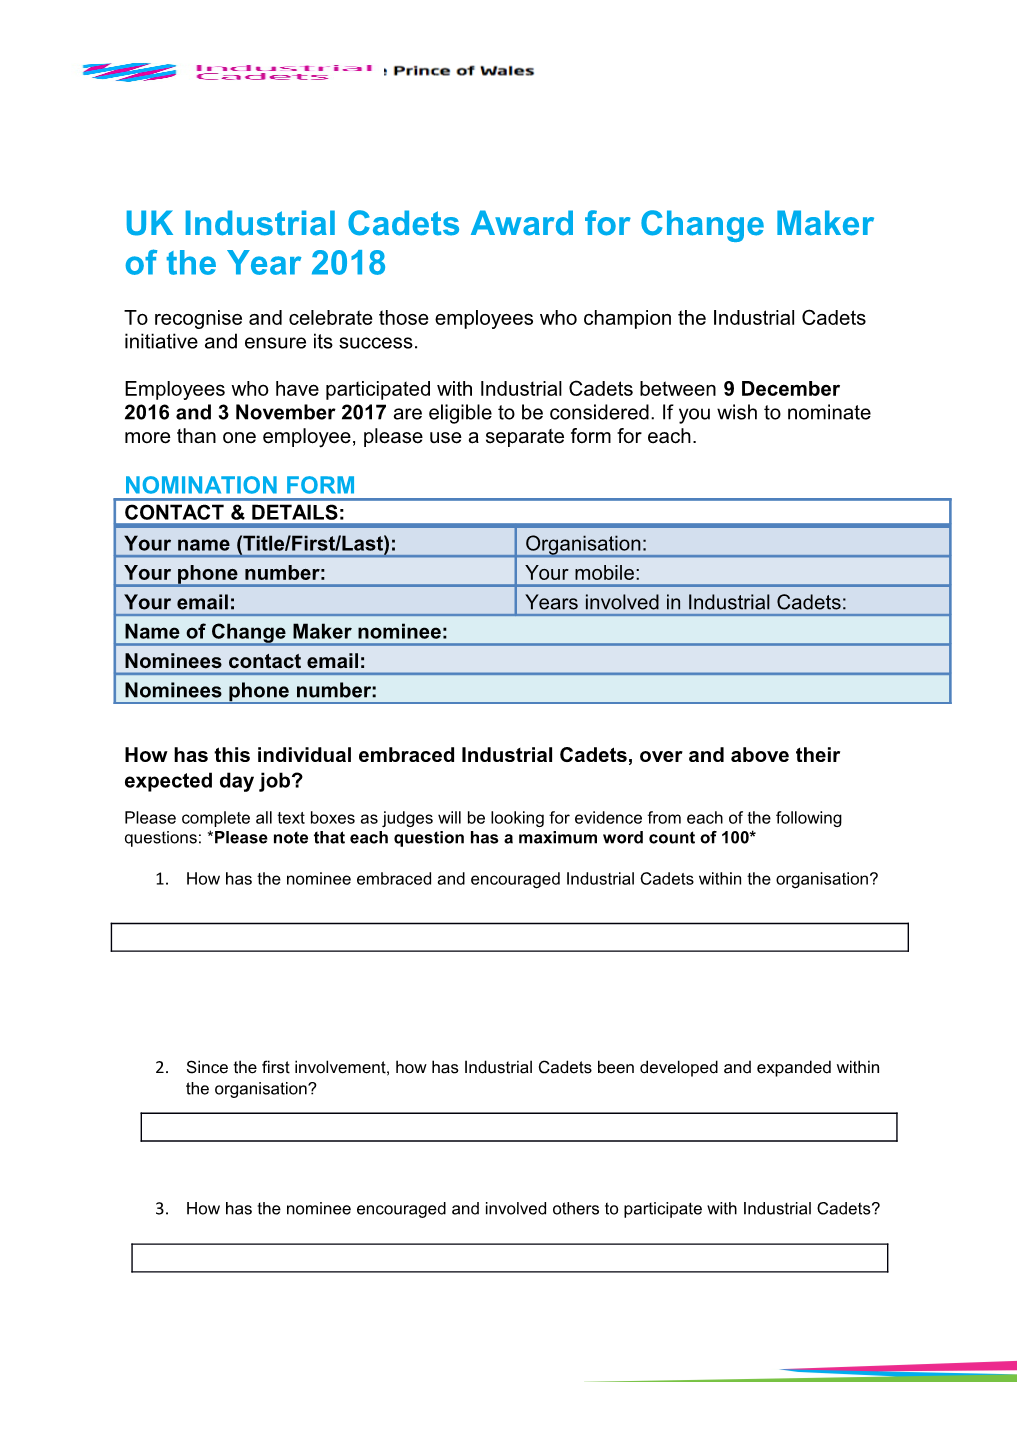 UK Industrial Cadets Award for Change Maker of the Year 2018